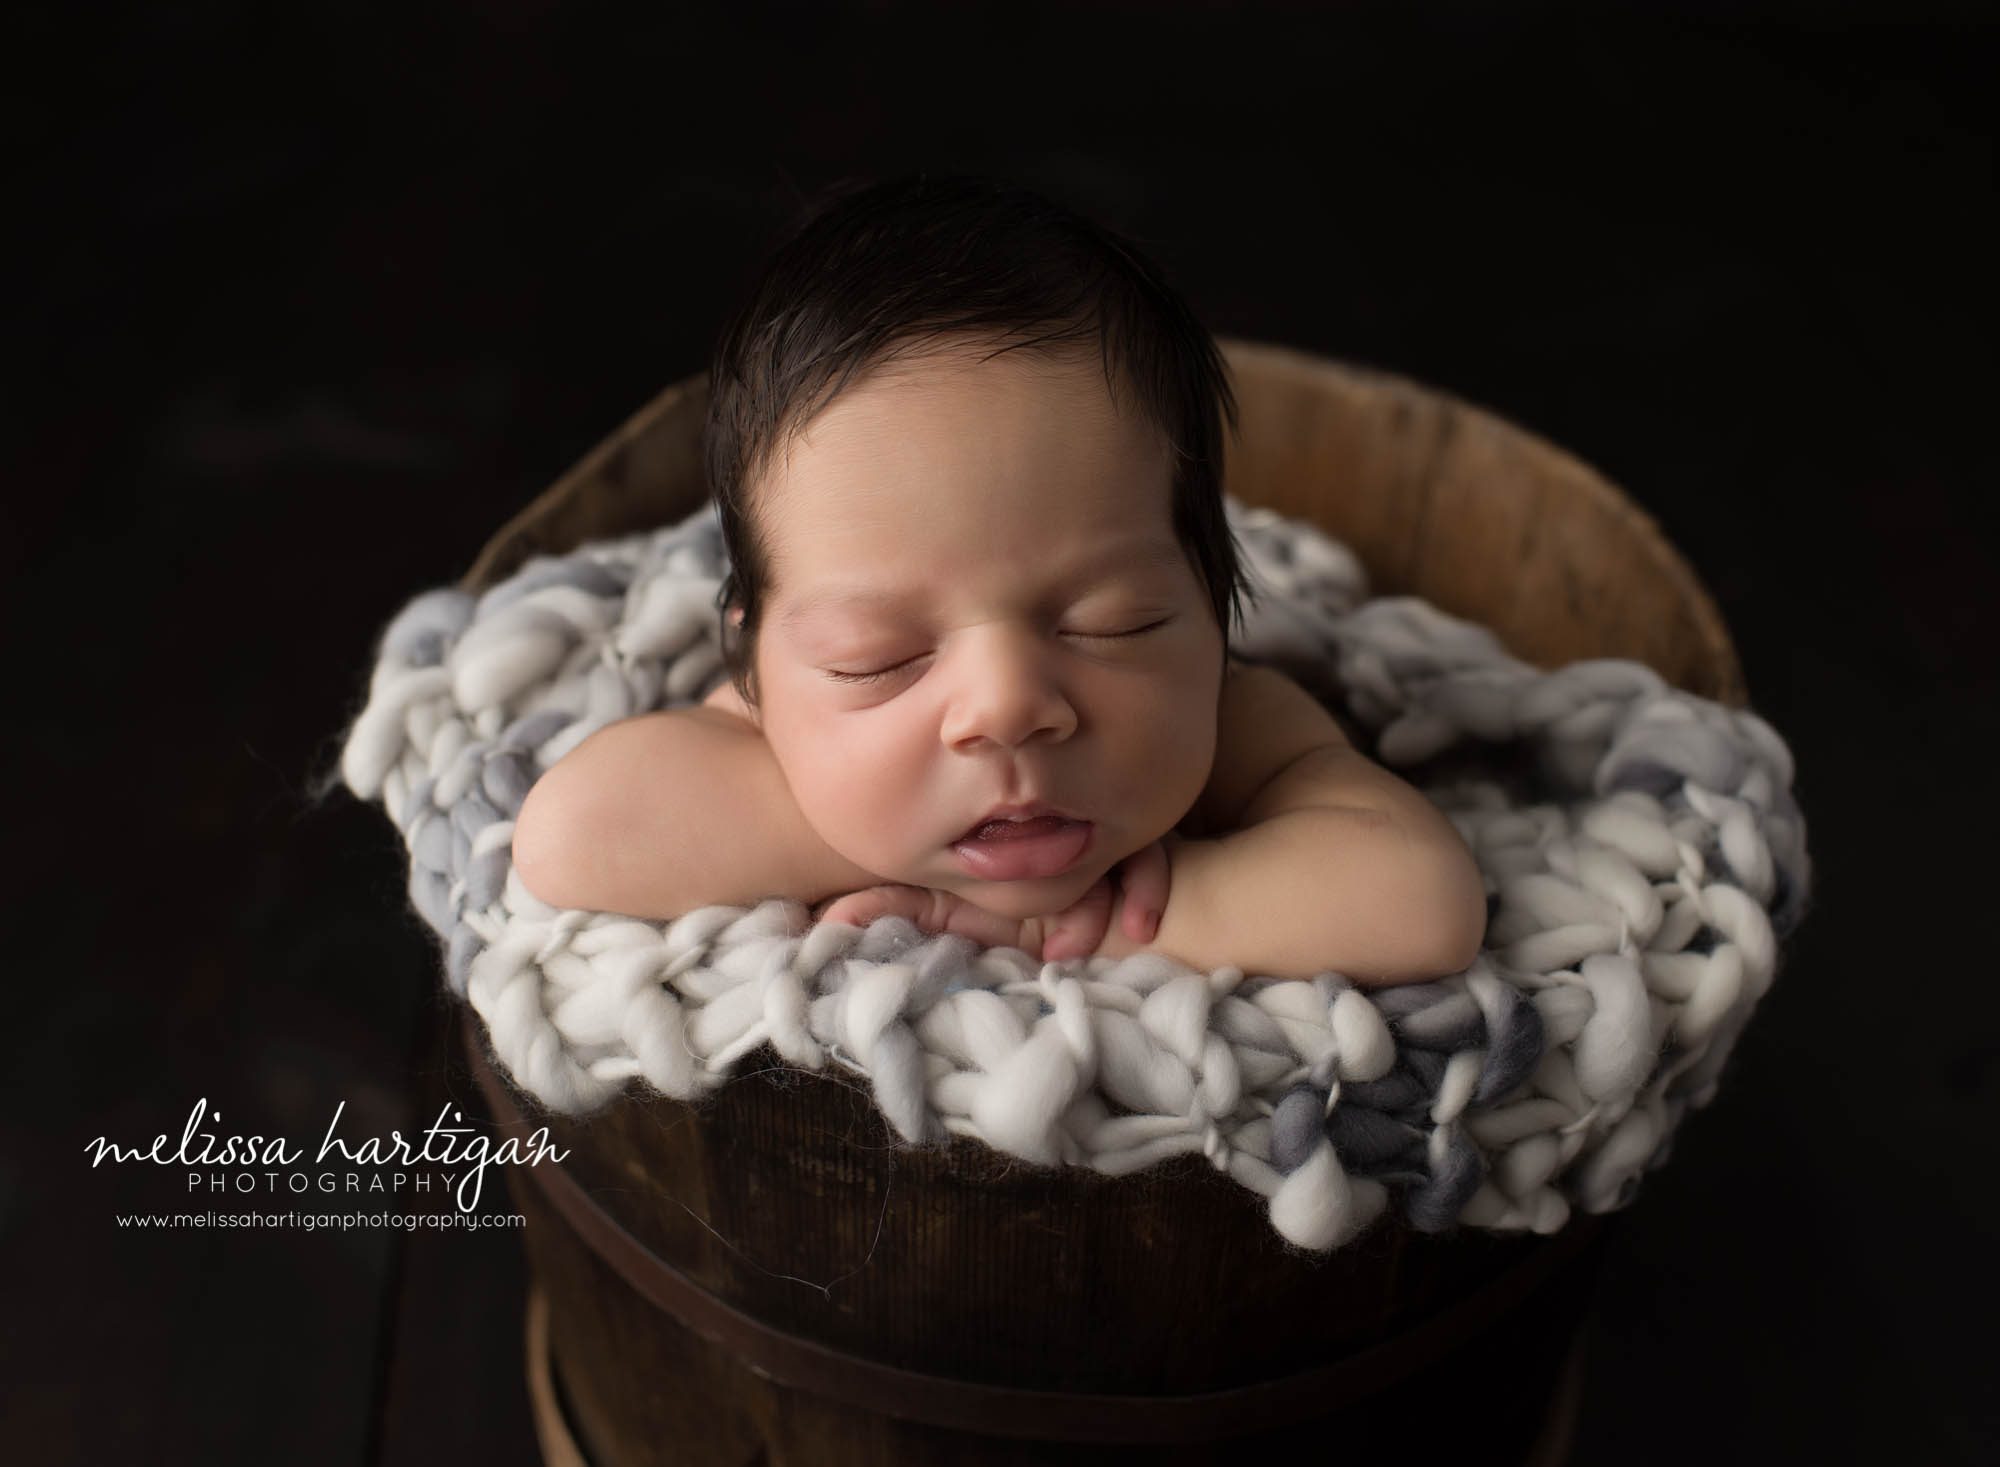 Melissa Hartigan Photography CT Newborn Photographer East Hartford baby boy sleeping in wooden bucket with white and gray blanket